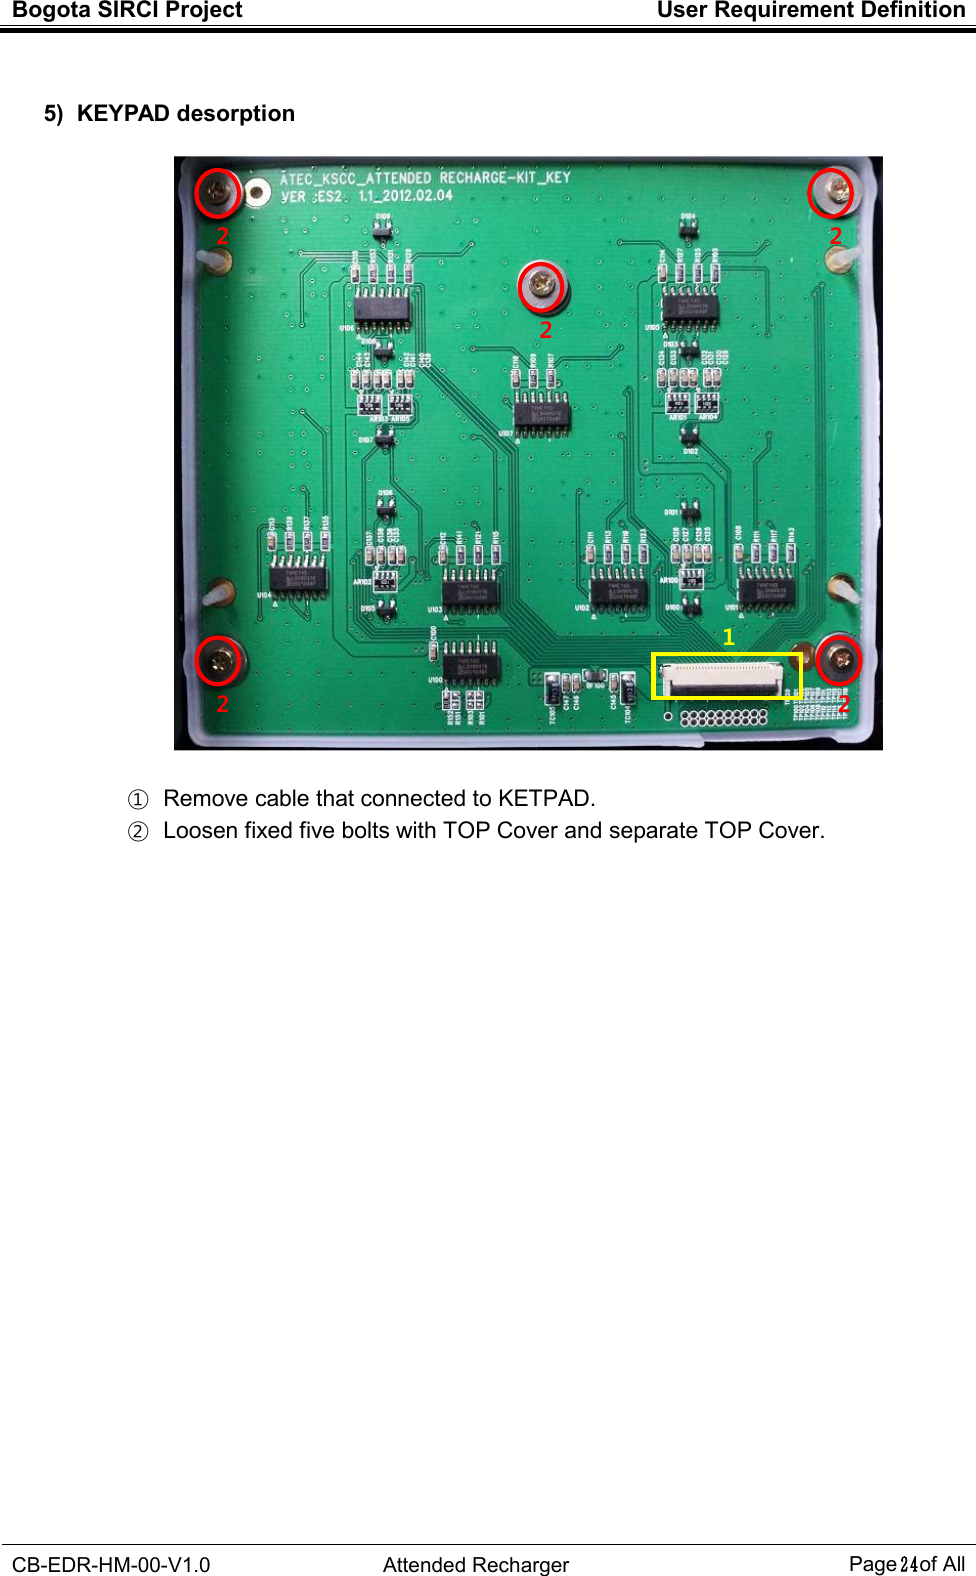 Bogota SIRCI Project  User Requirement Definition  CB-EDR-HM-00-V1.0  Attended Recharger Page２４ of All   5)  KEYPAD desorption      ①   Remove cable that connected to KETPAD. ②   Loosen fixed five bolts with TOP Cover and separate TOP Cover.                         1 2 2 2 2 2 